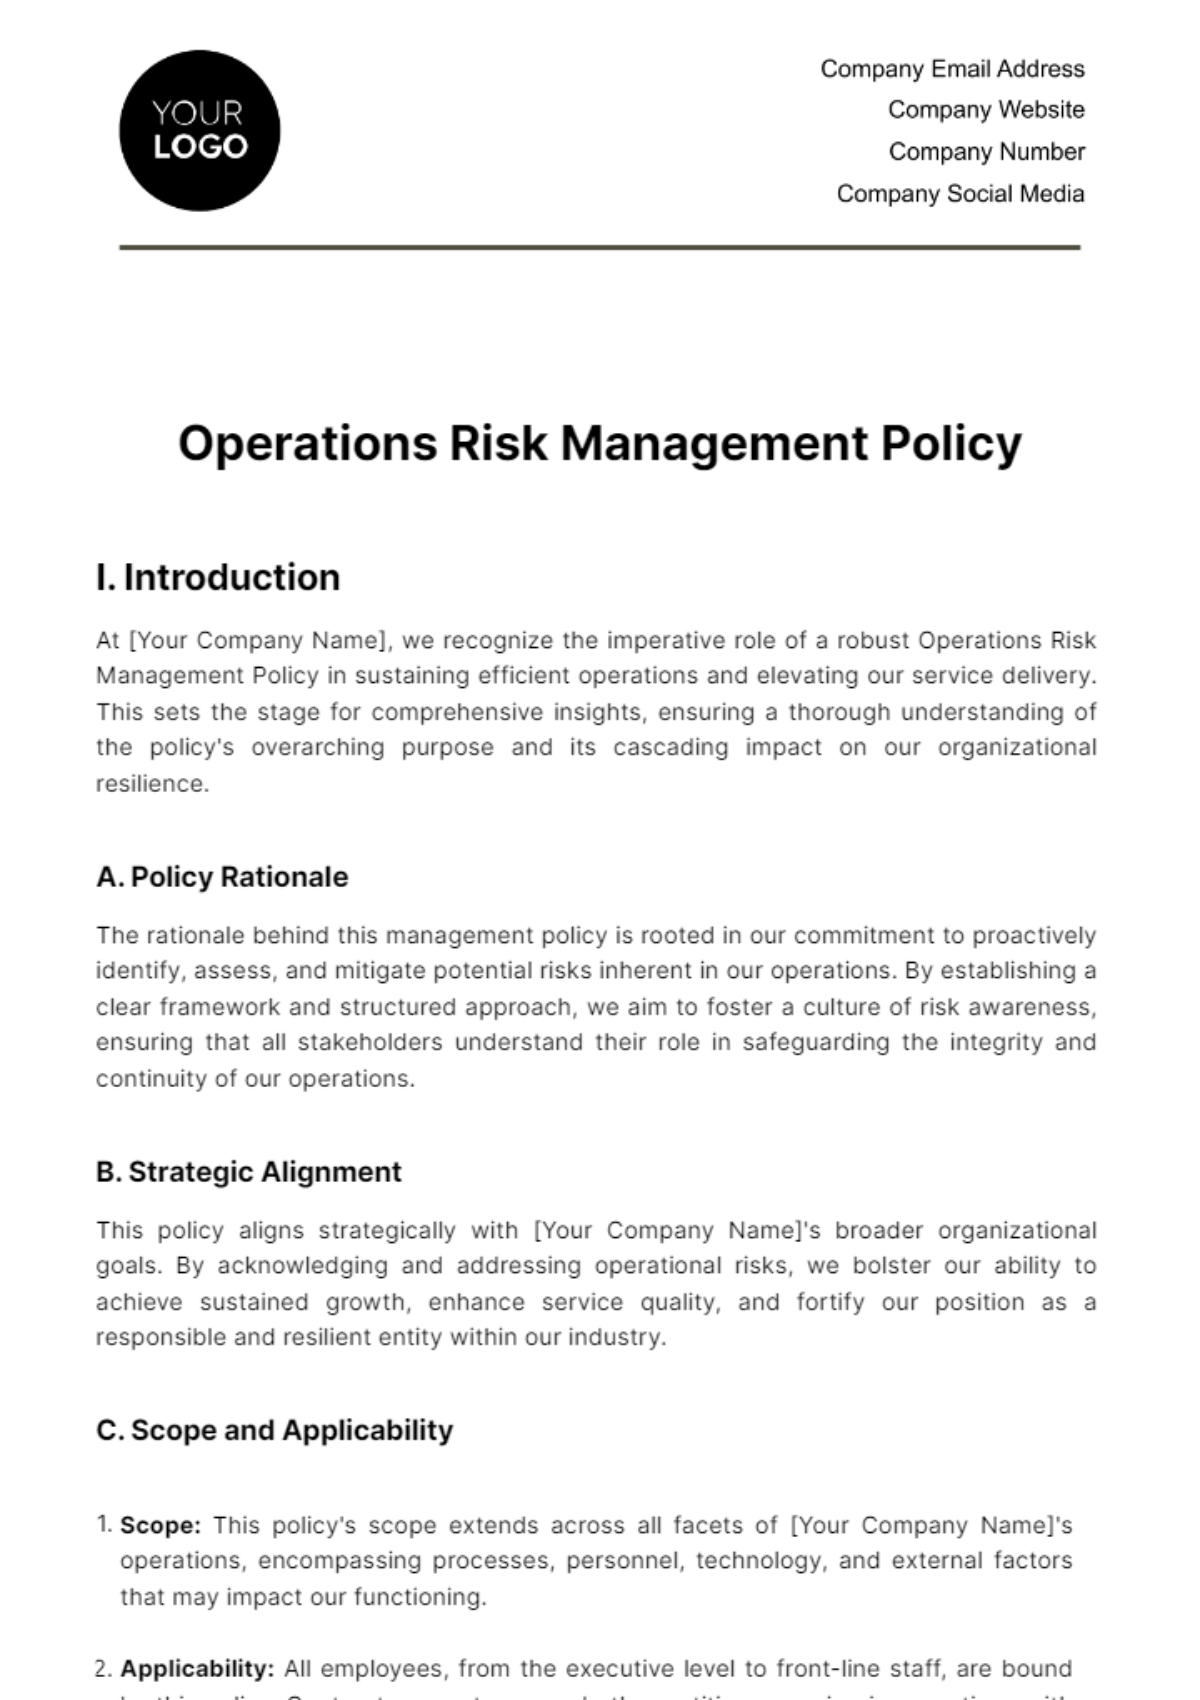 Operations Risk Management Policy Template